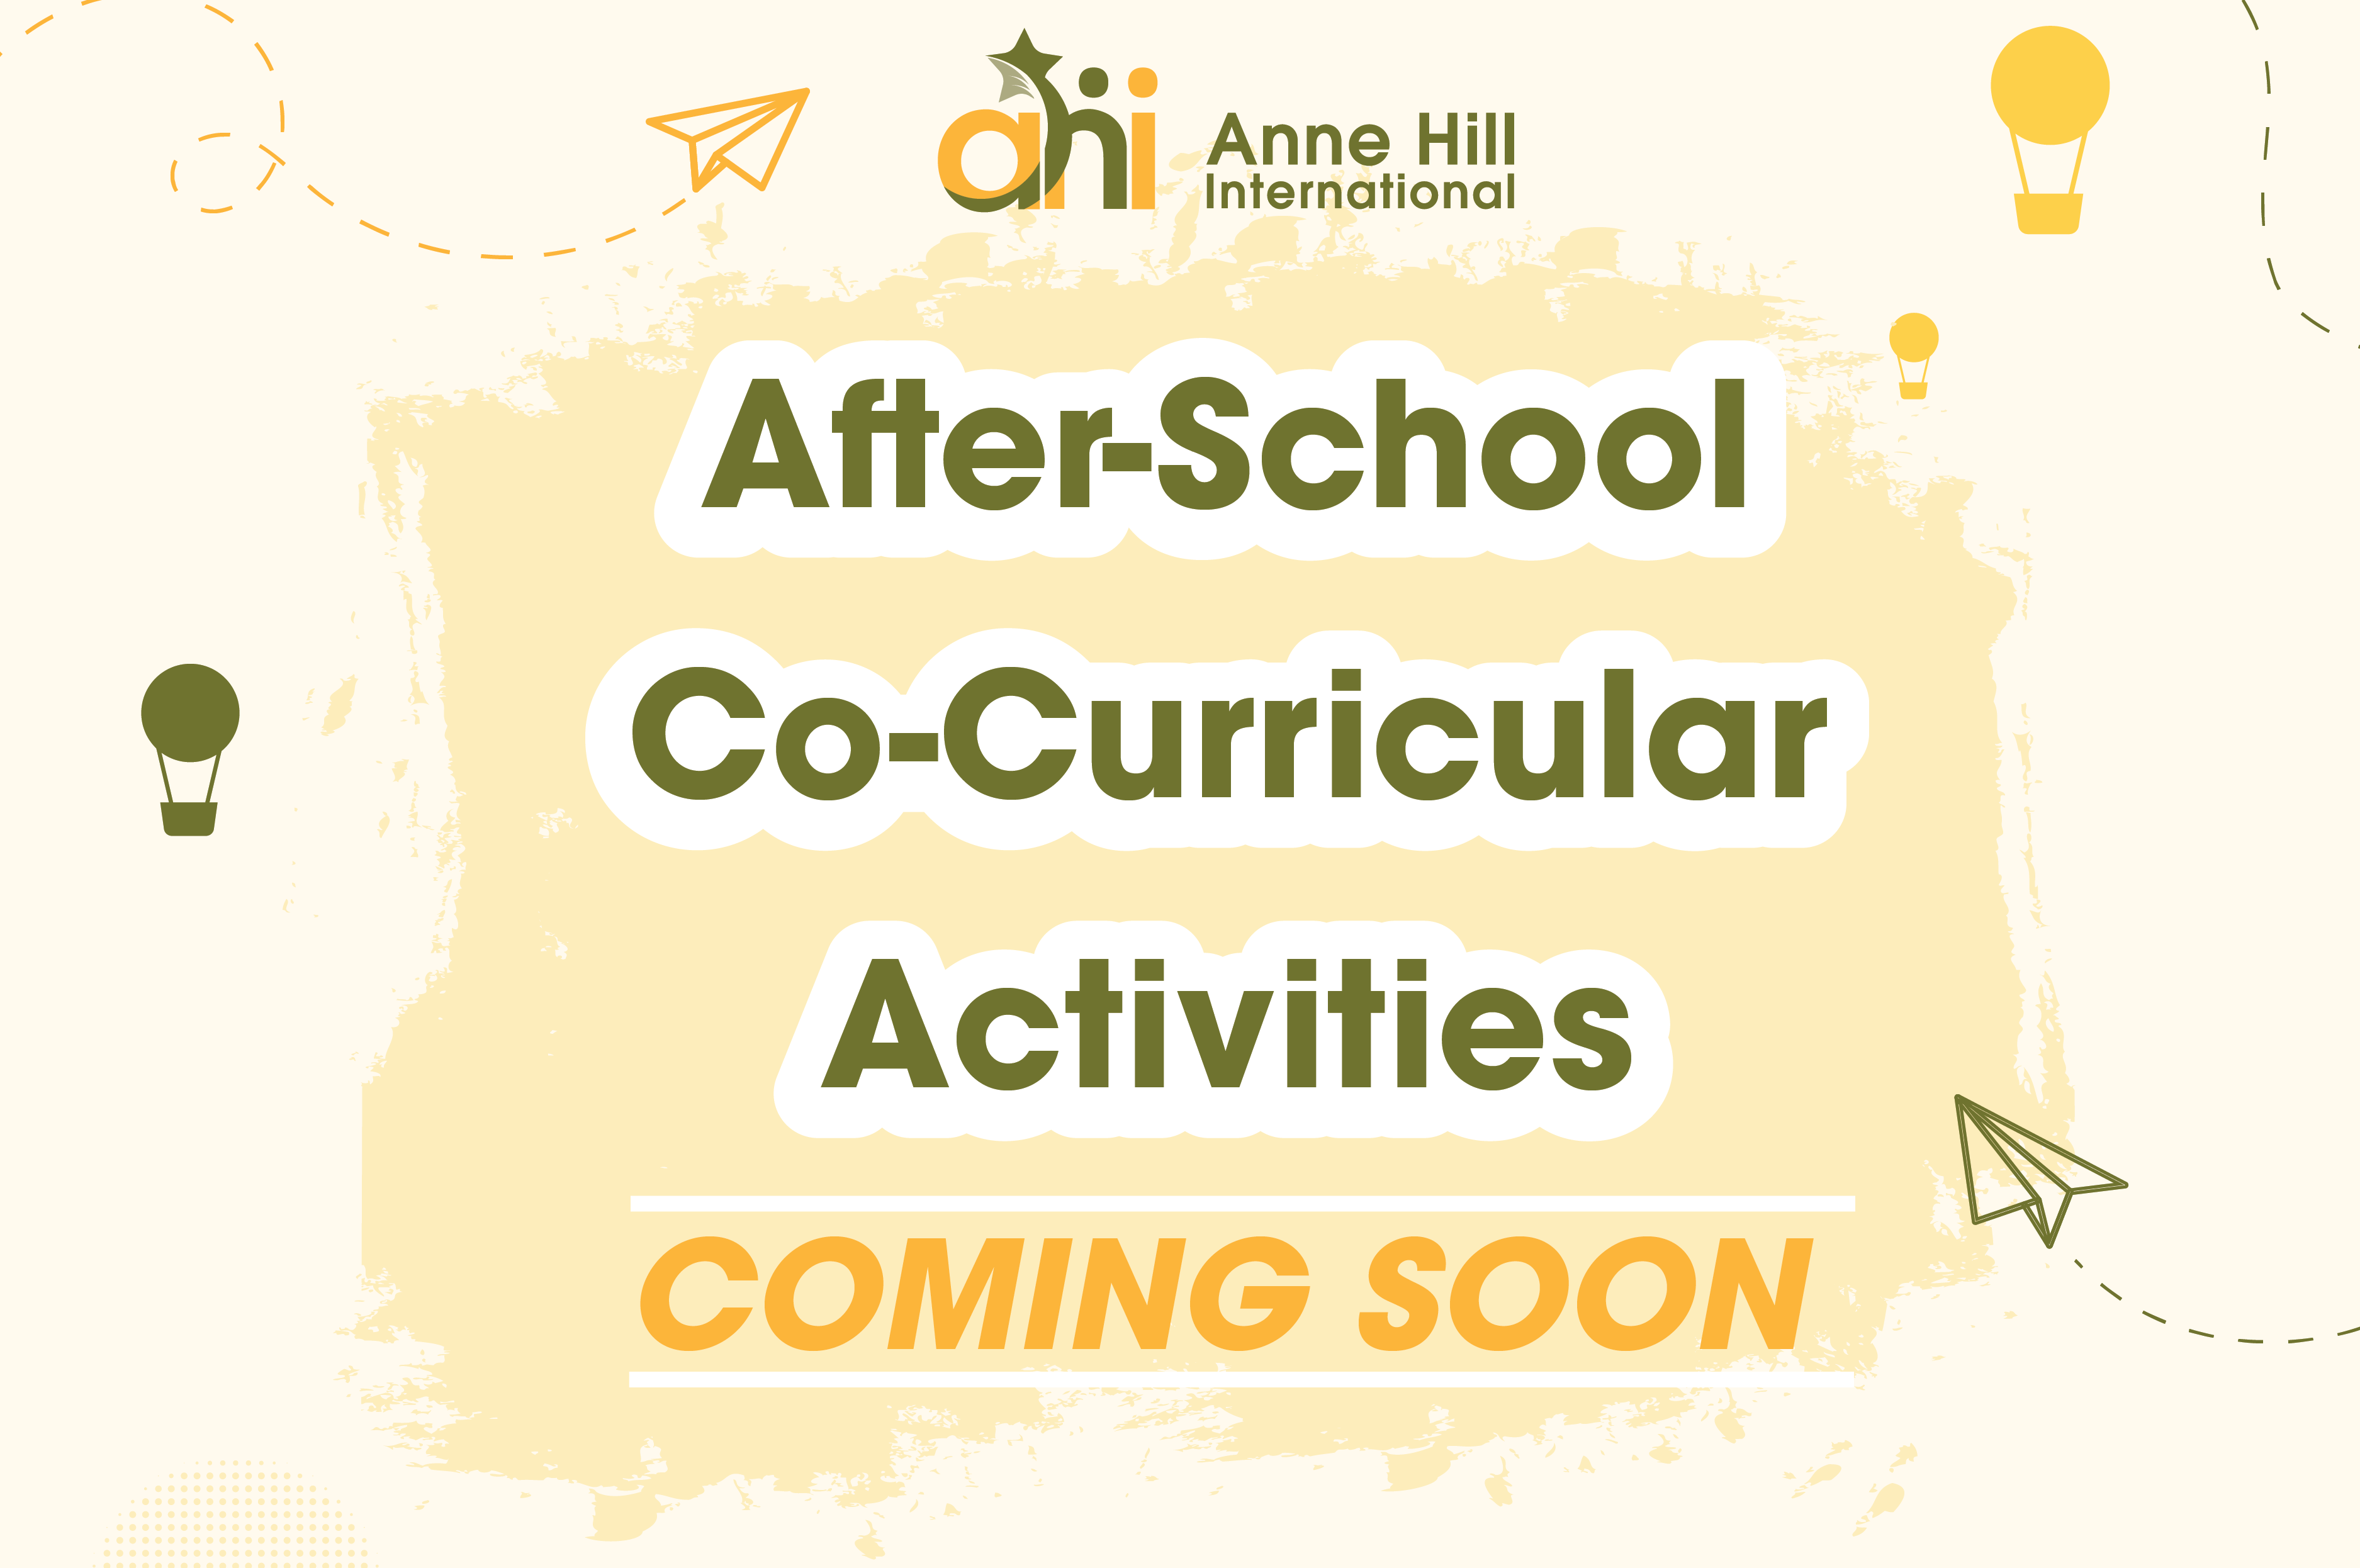 [COMING SOON] AFTER SCHOOL CO-CURRICULAR ACTIVITIES